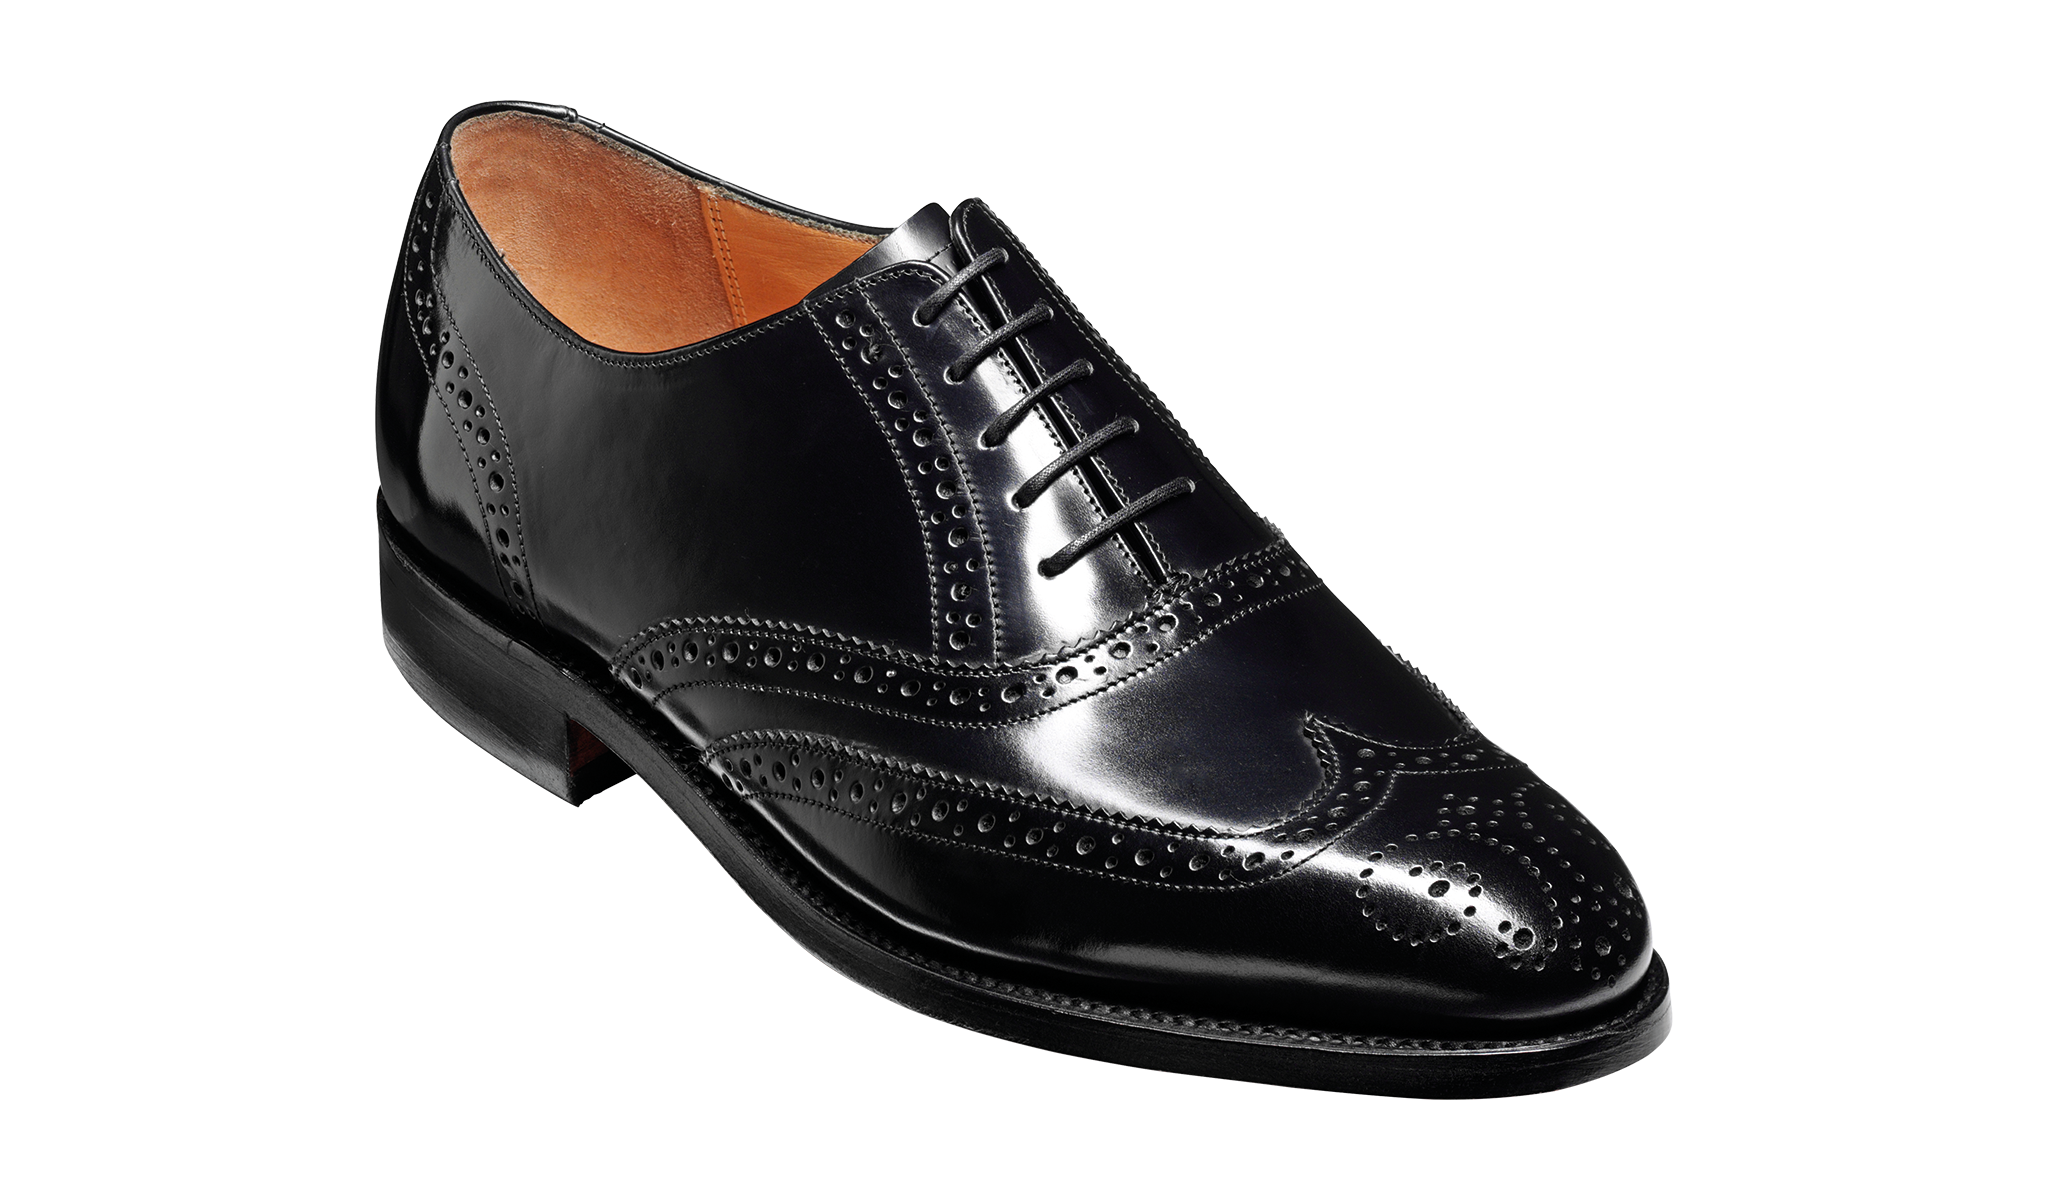 Albert - A black leather mens brogue shoe by Barker.